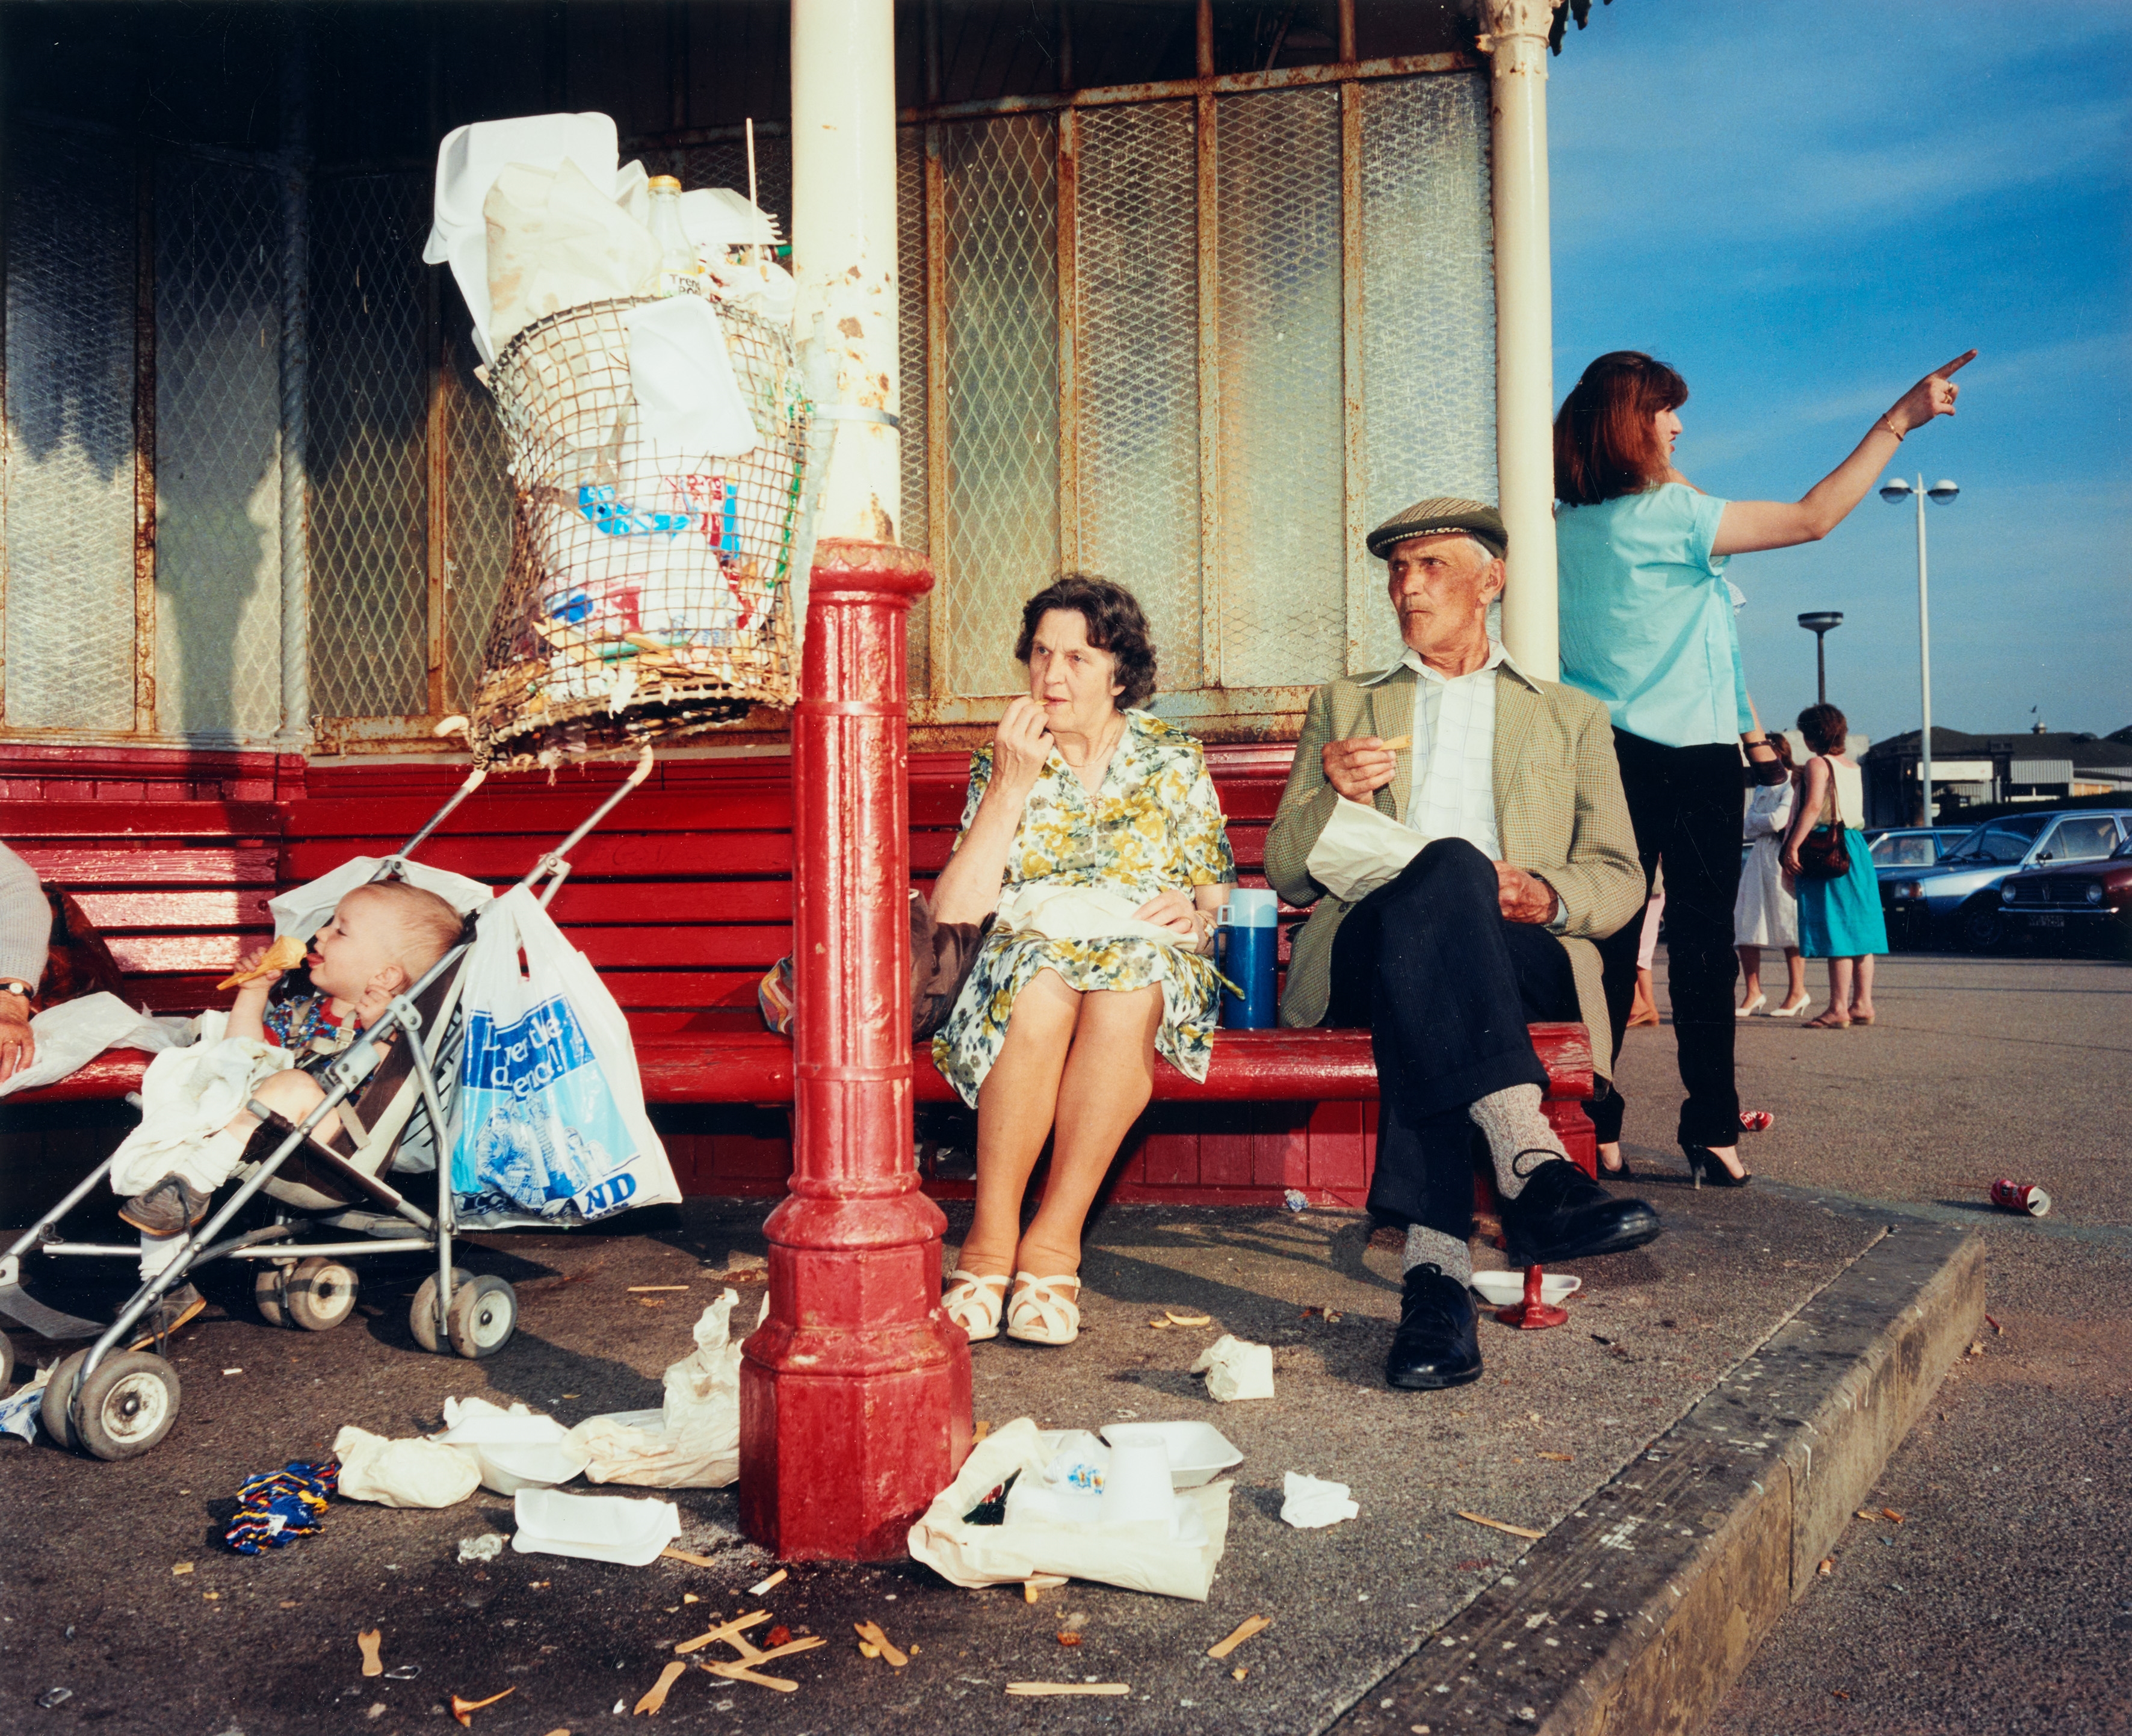 New Brighton, Merseyside (from the series: The last Resort) by Martin Parr, 1983-1985